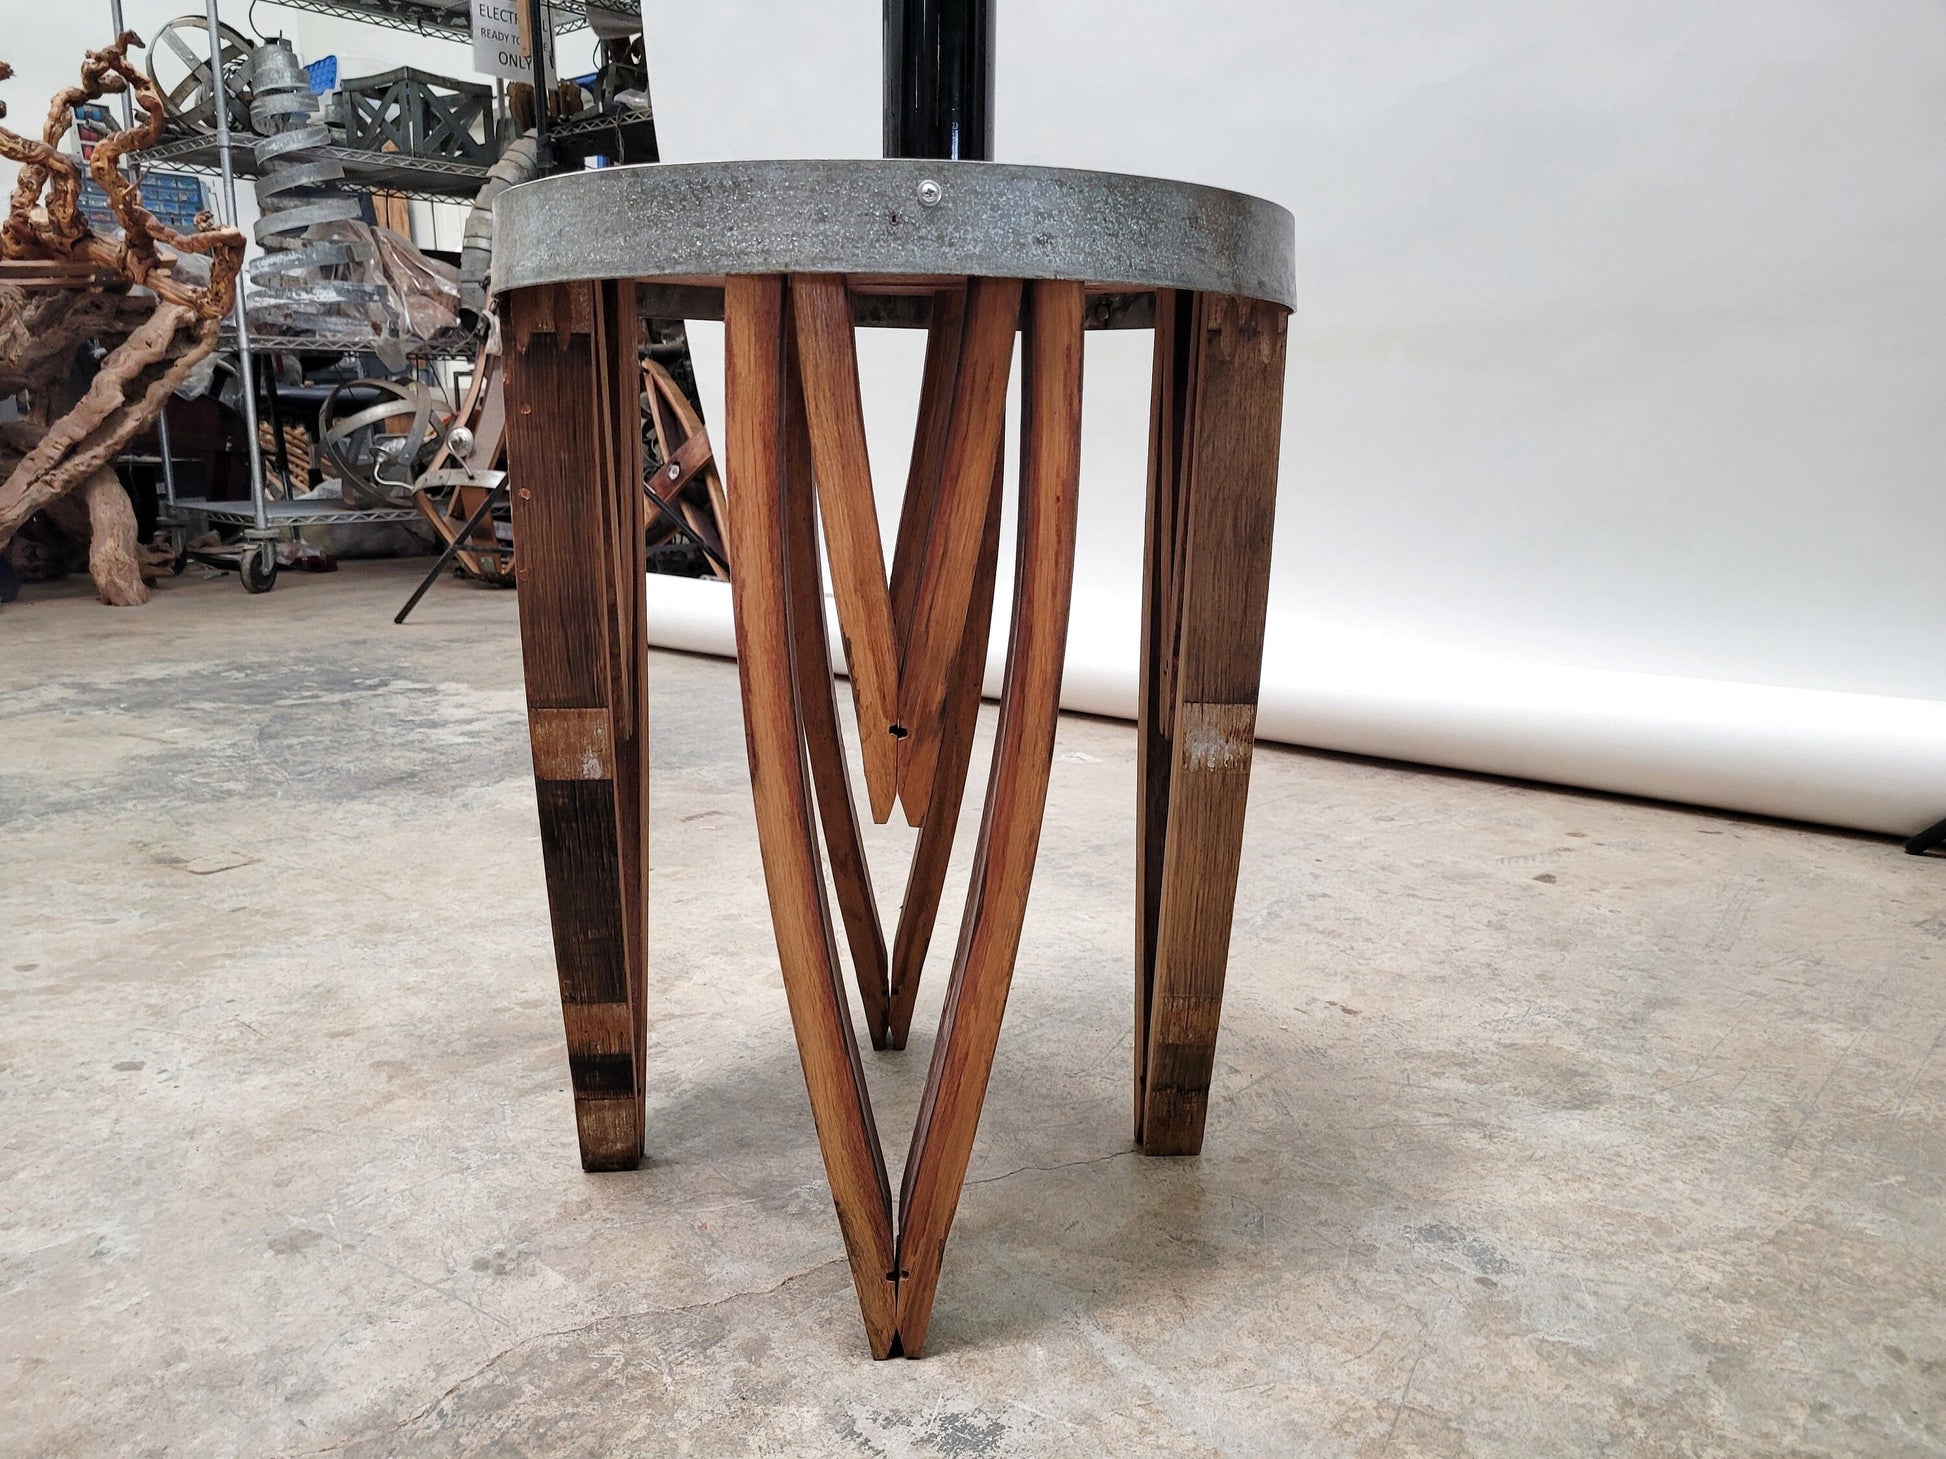 Wine Barrel Side Table - Kapea - made from retired Napa wine barrels. 100% Recycled!